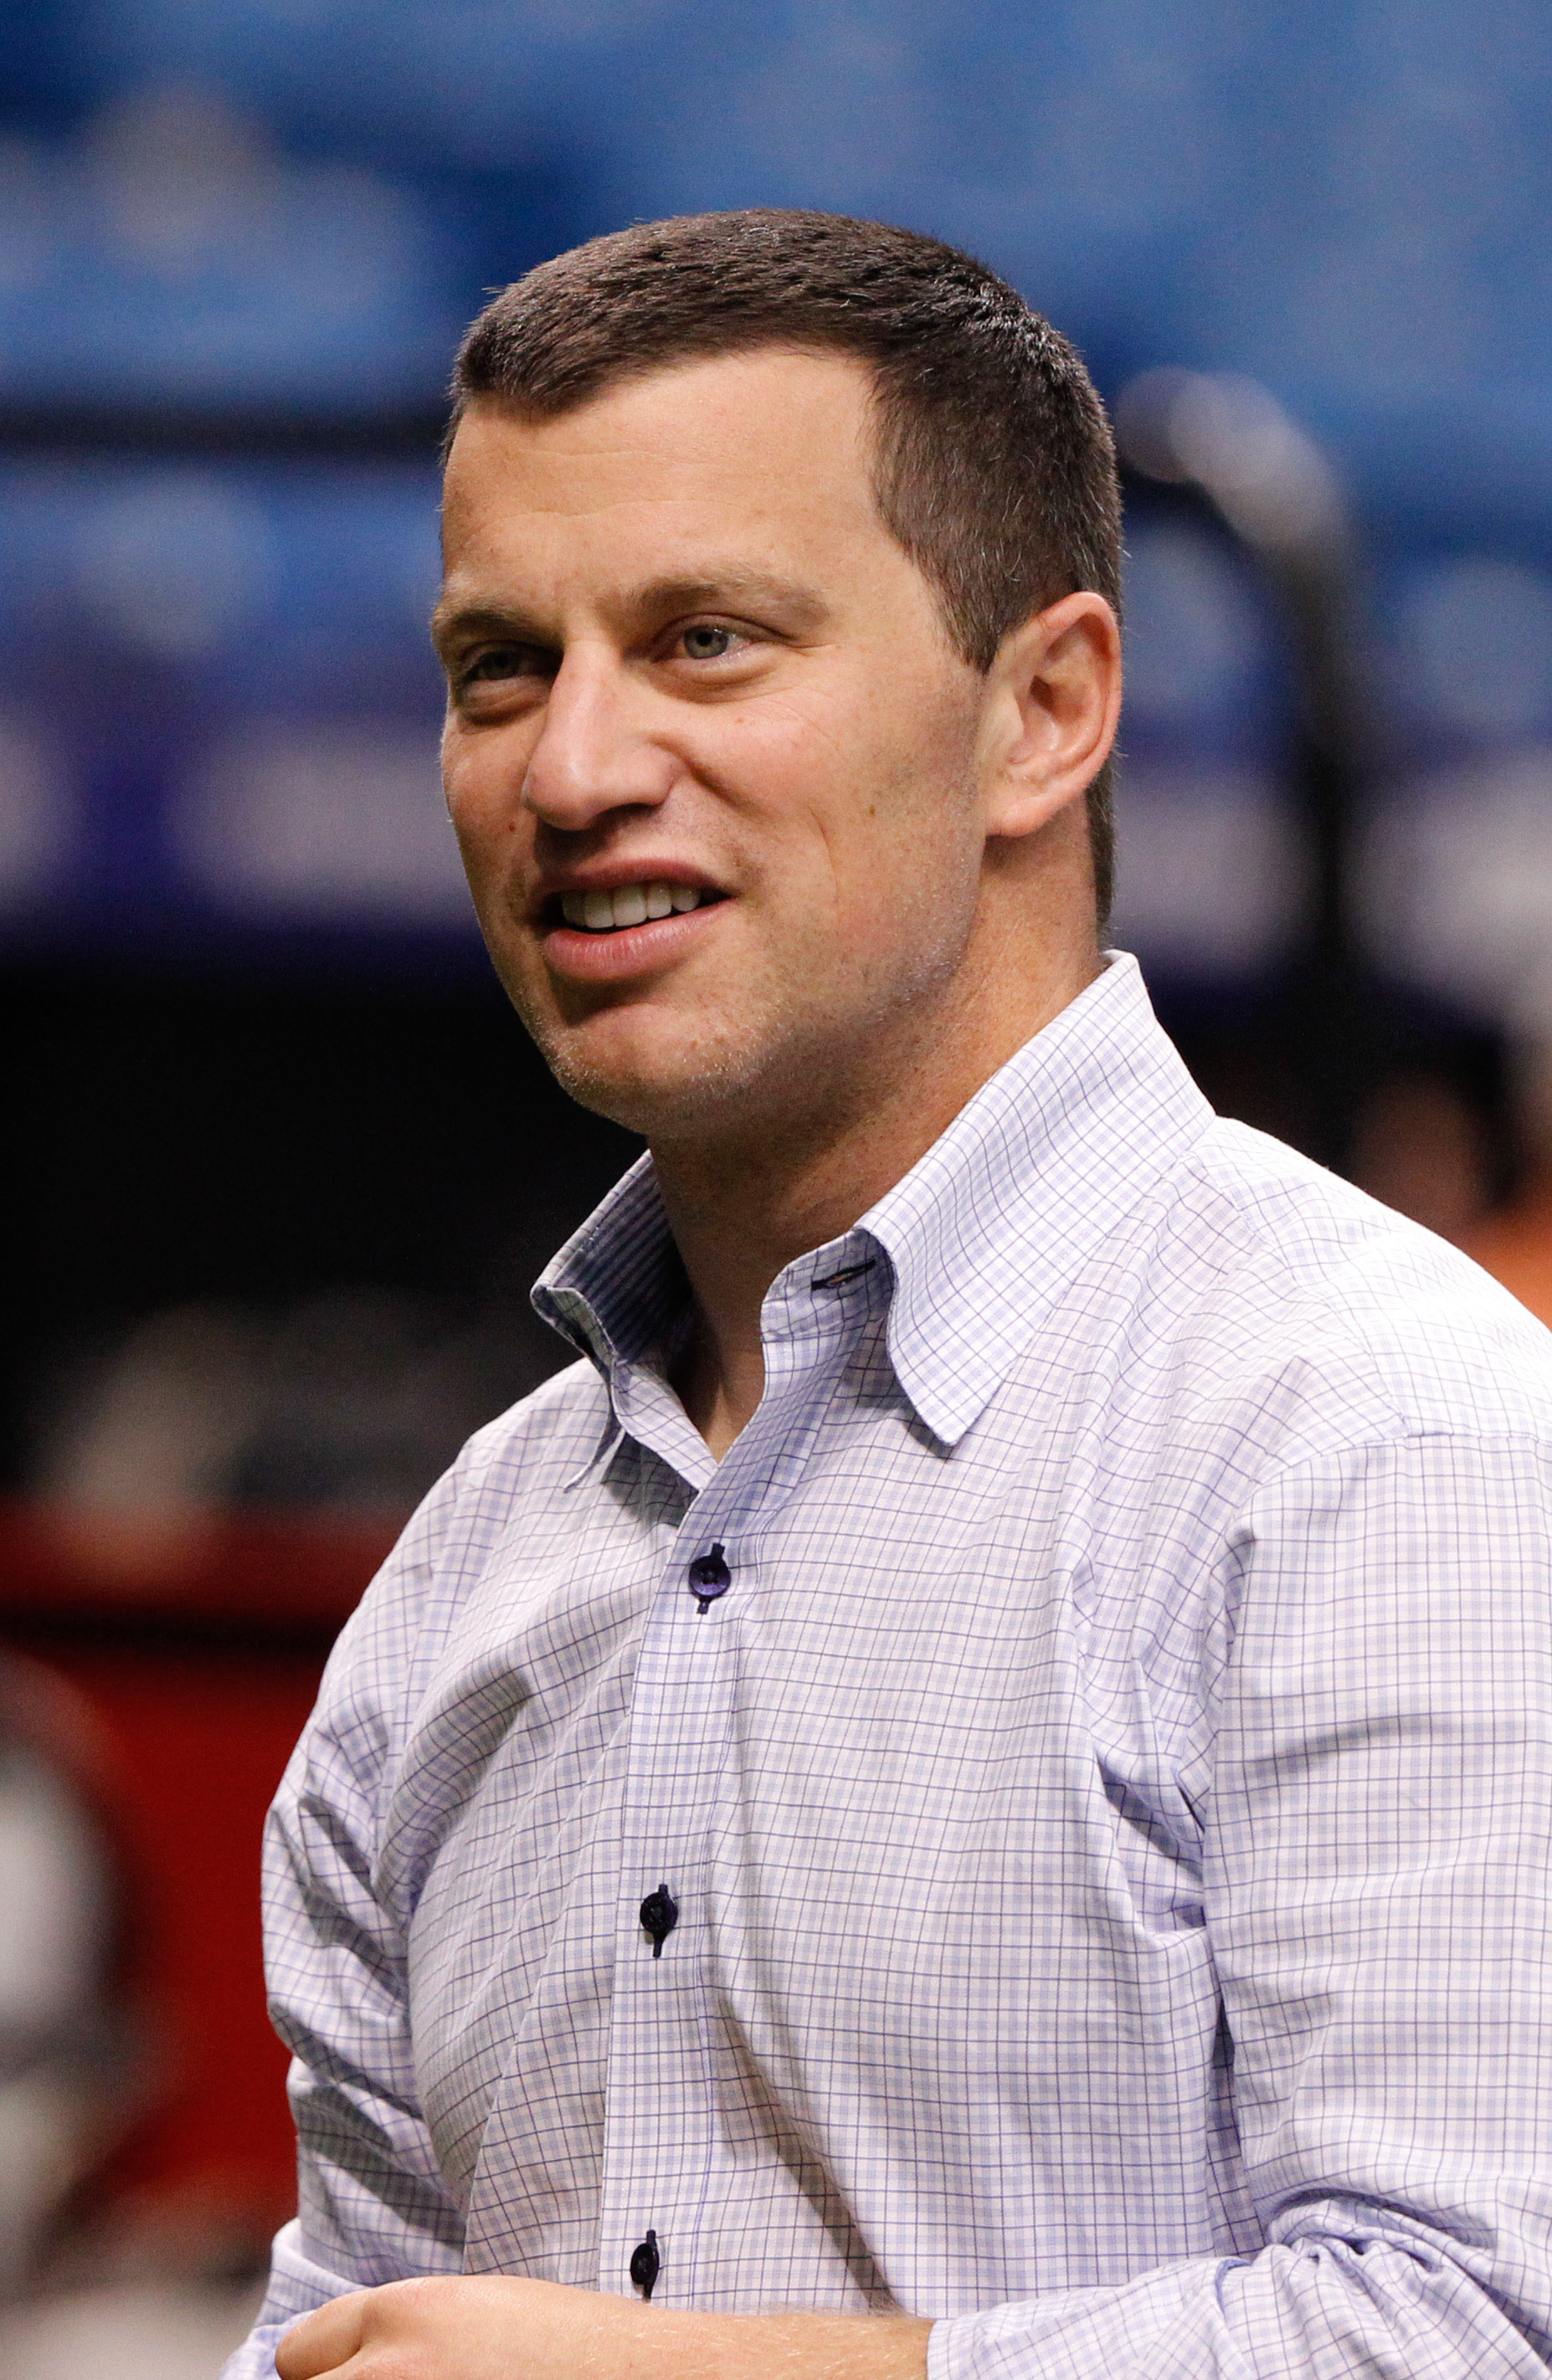 Dodgers: Andrew Friedman Discusses His Future with Organization